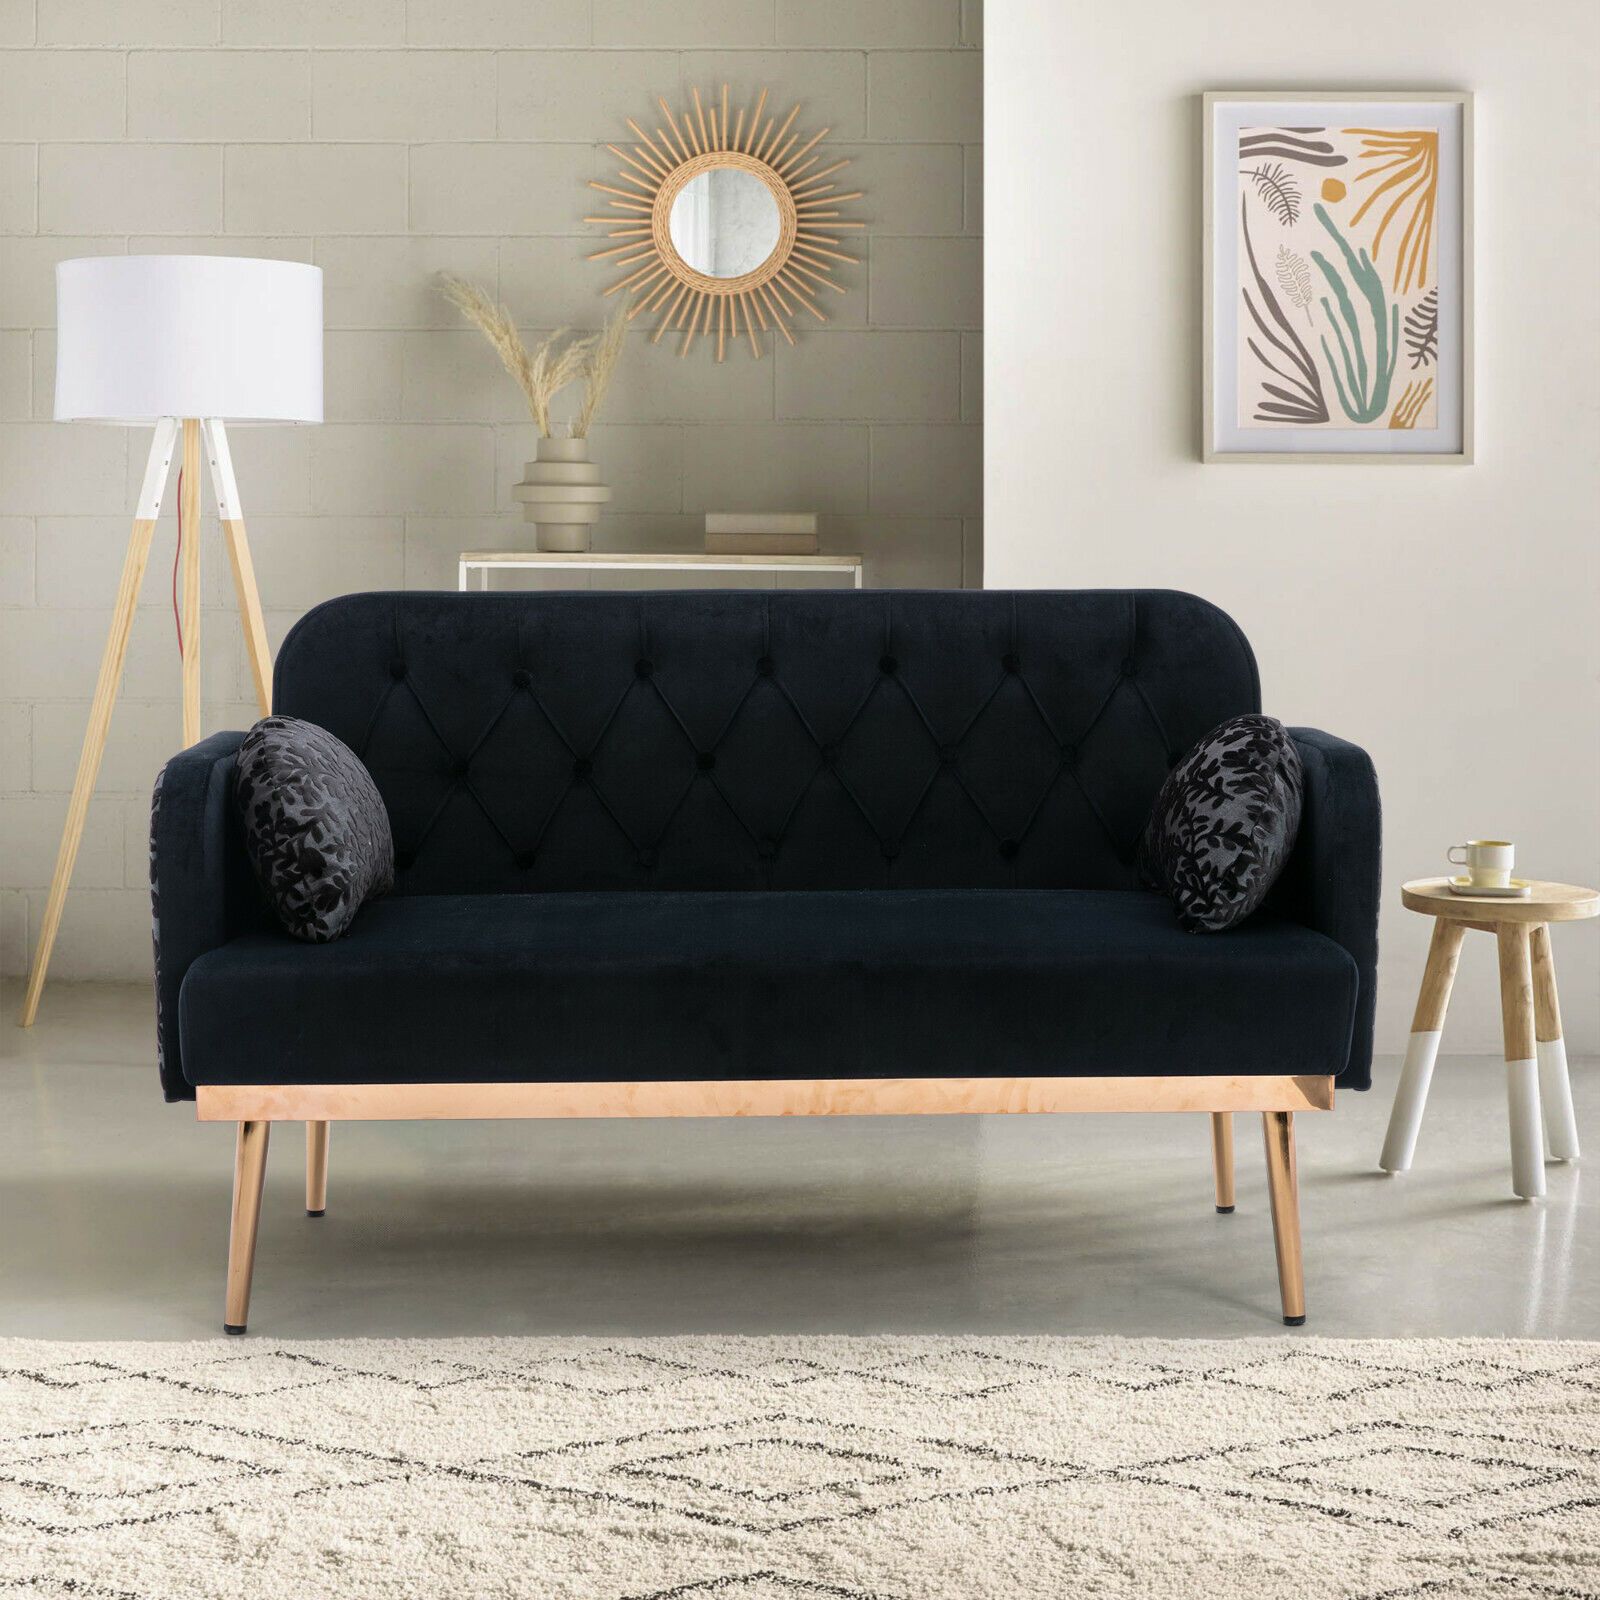 Black Velvet Sofa Accent Sofa Loveseat Sofa With Metal Feet And 2 Pillows |  Ebay With Regard To 2 Seater Black Velvet Sofa Beds (View 12 of 15)